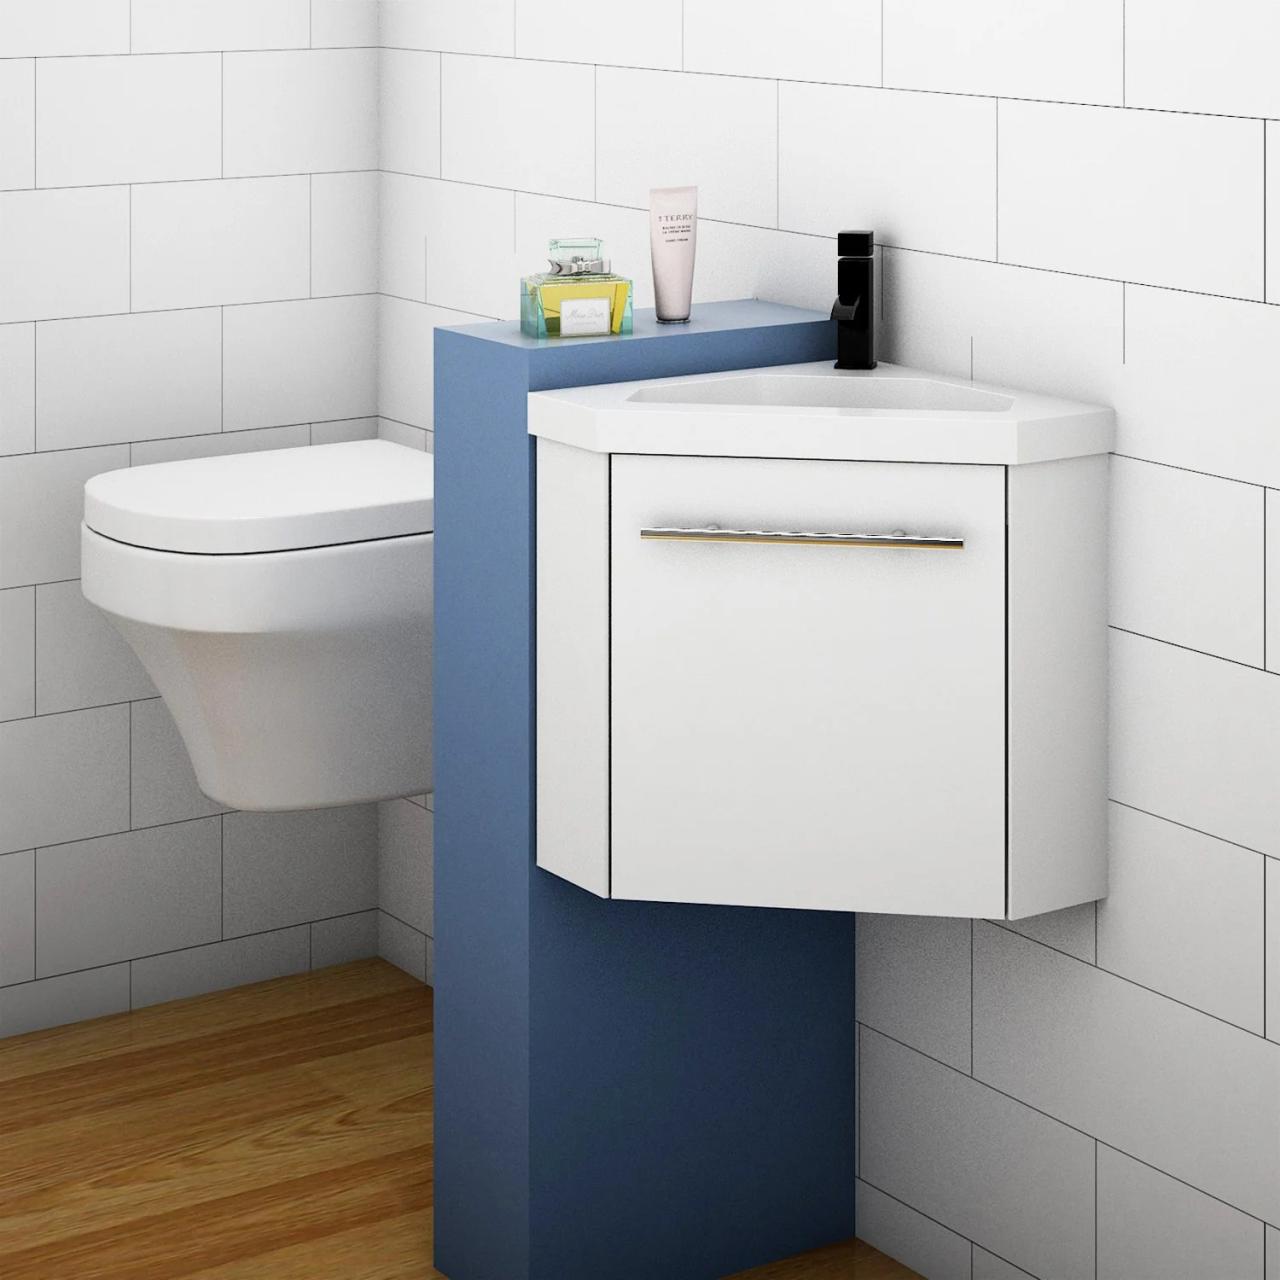 corner mounted bathroom vanity for efficient use of space